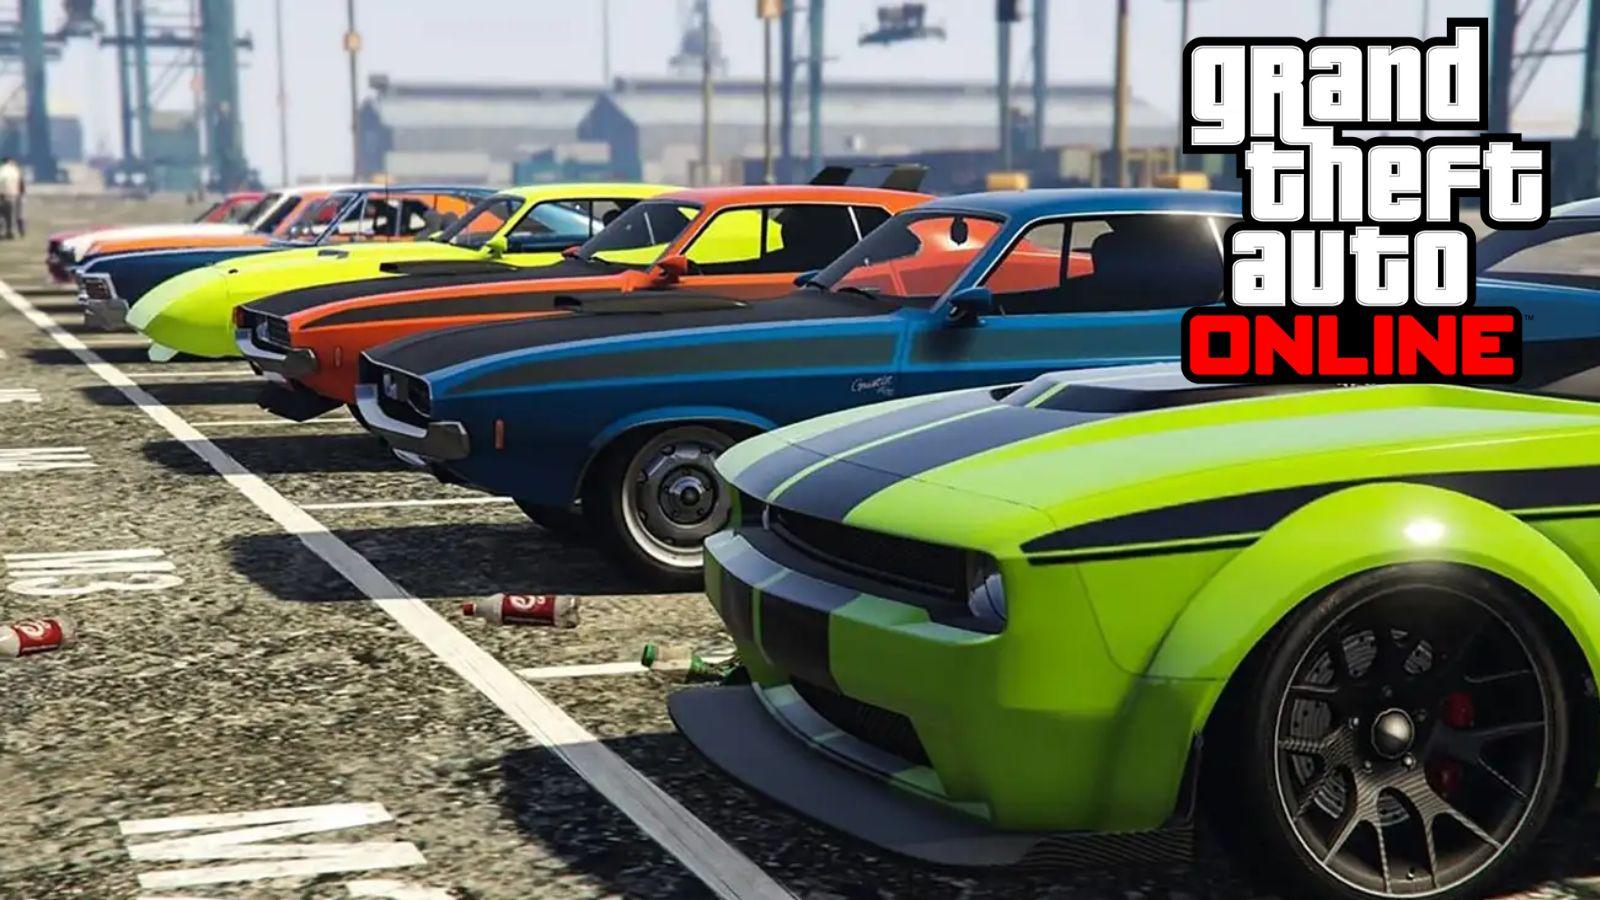 Cars in GTA Online parked up in parking spaces next to logo